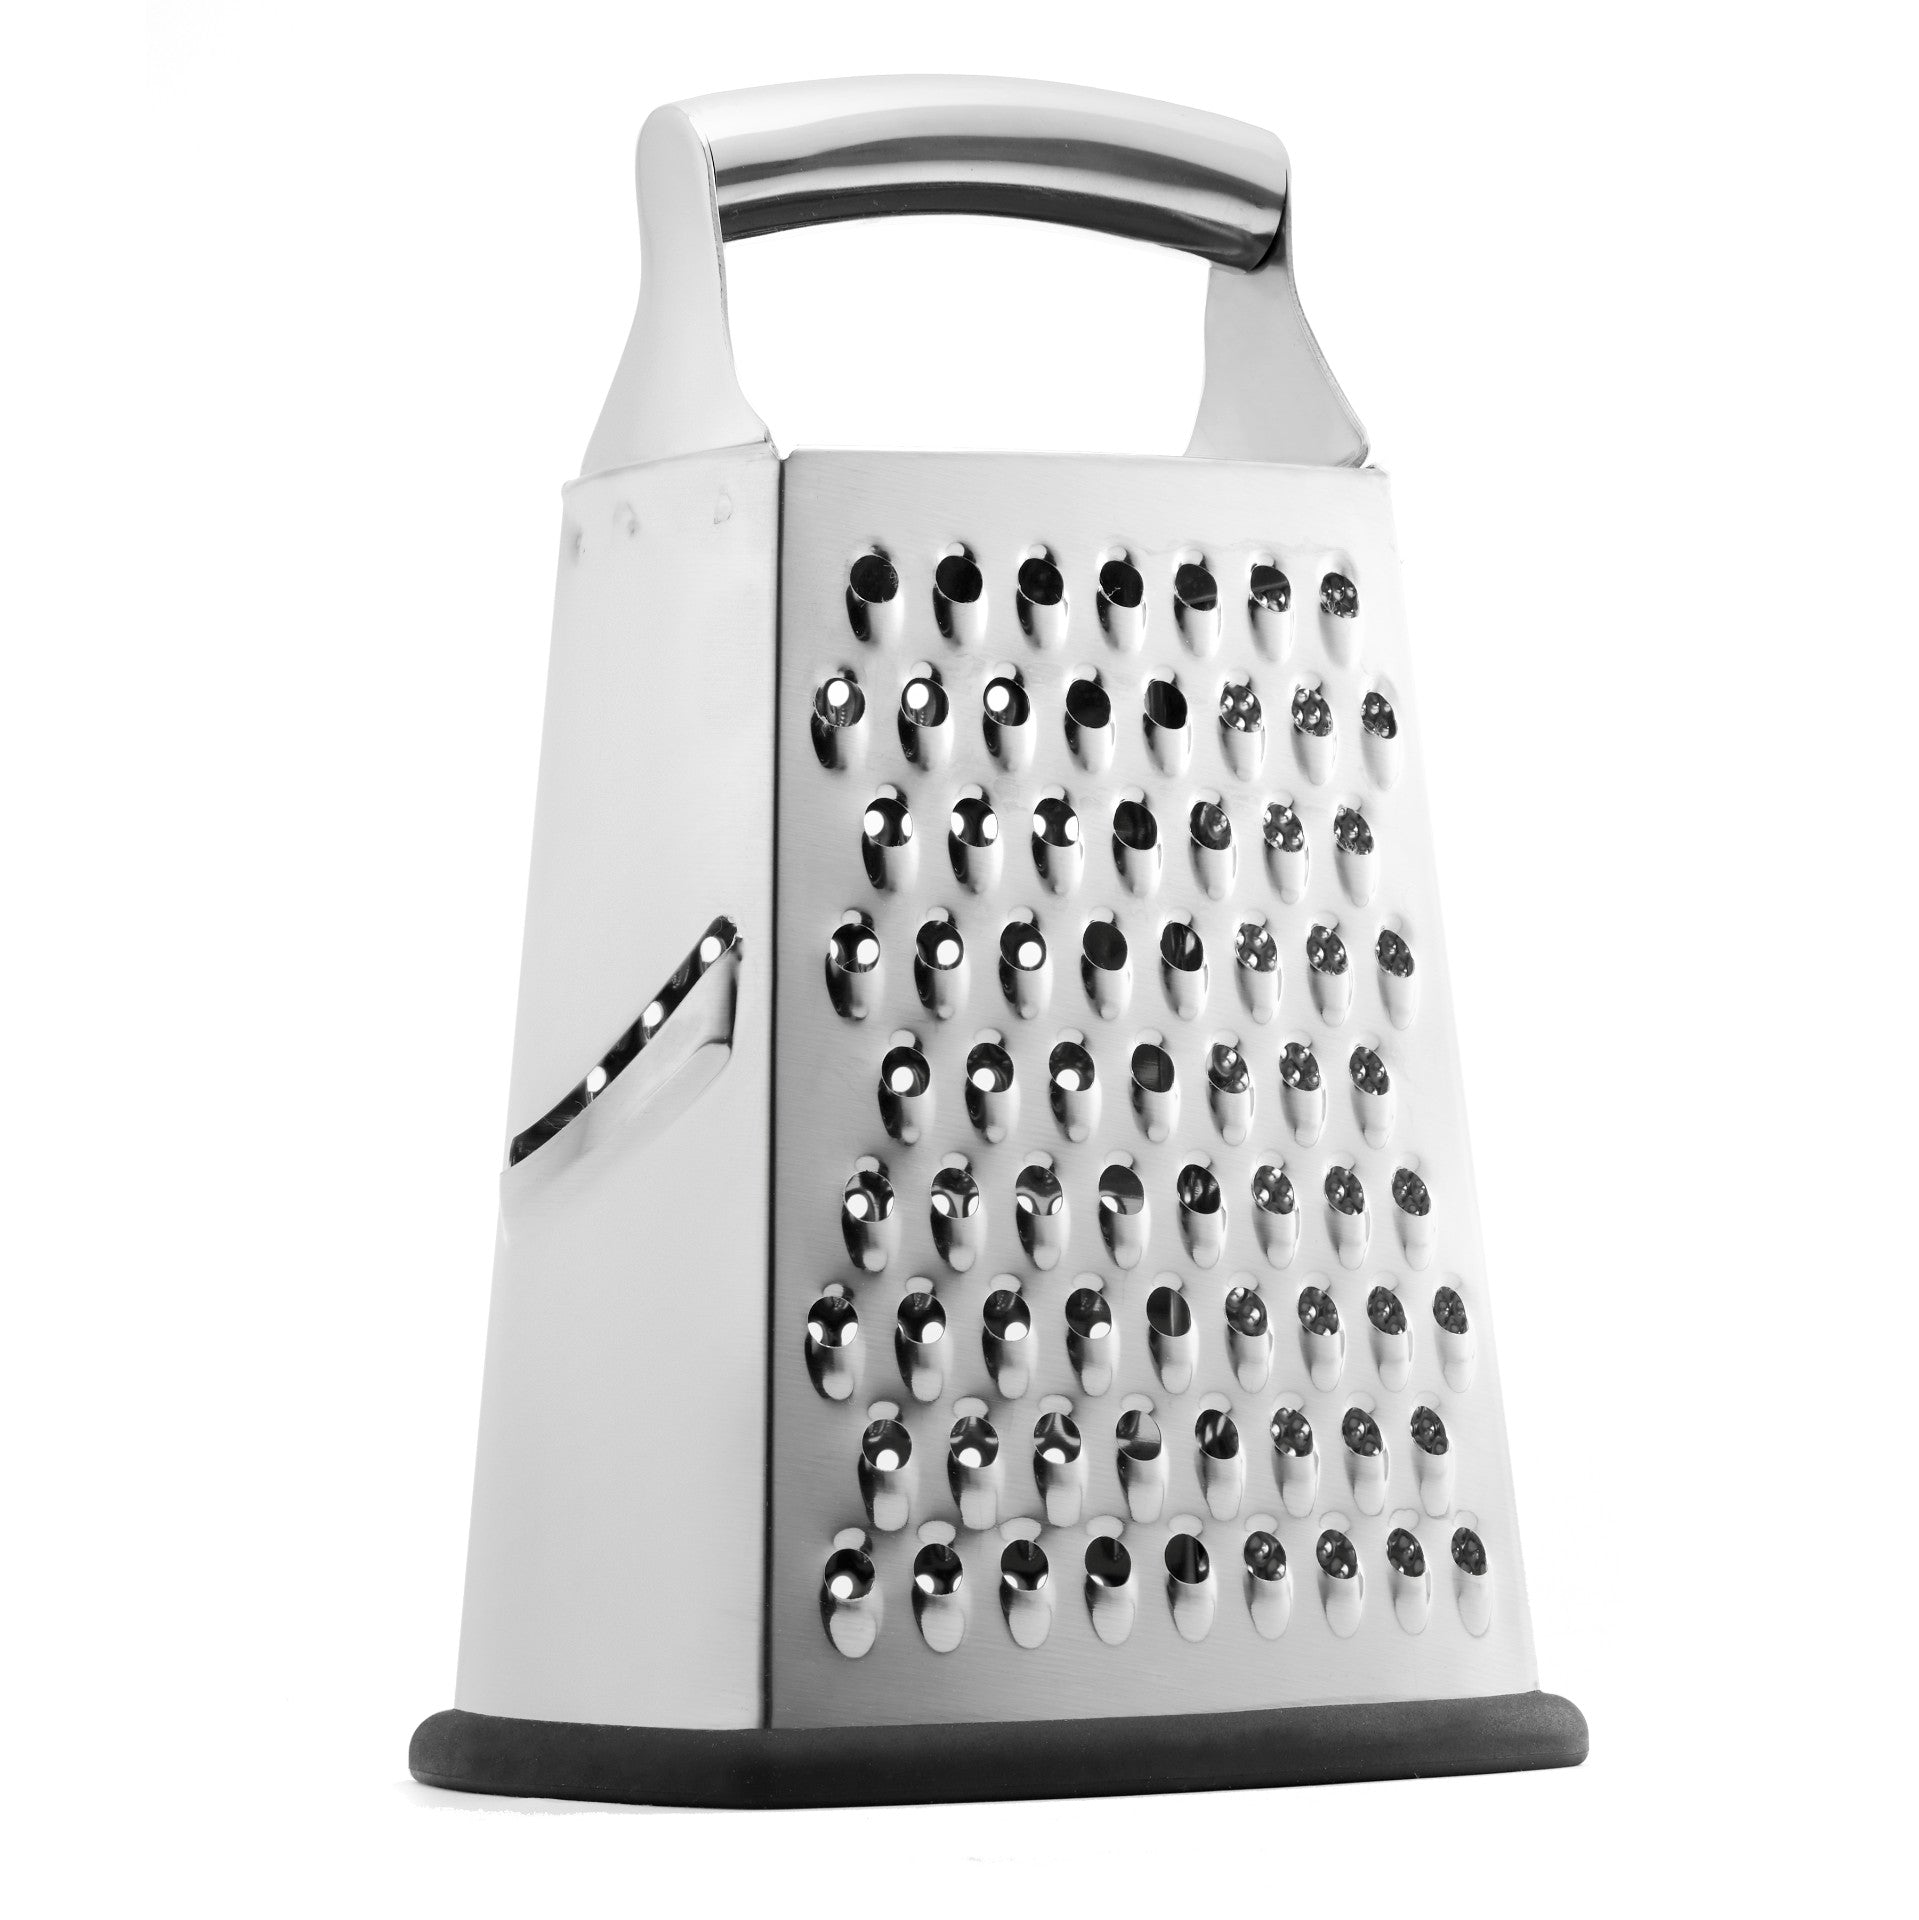 The Best 8 Box Graters in 2020 Reviewed